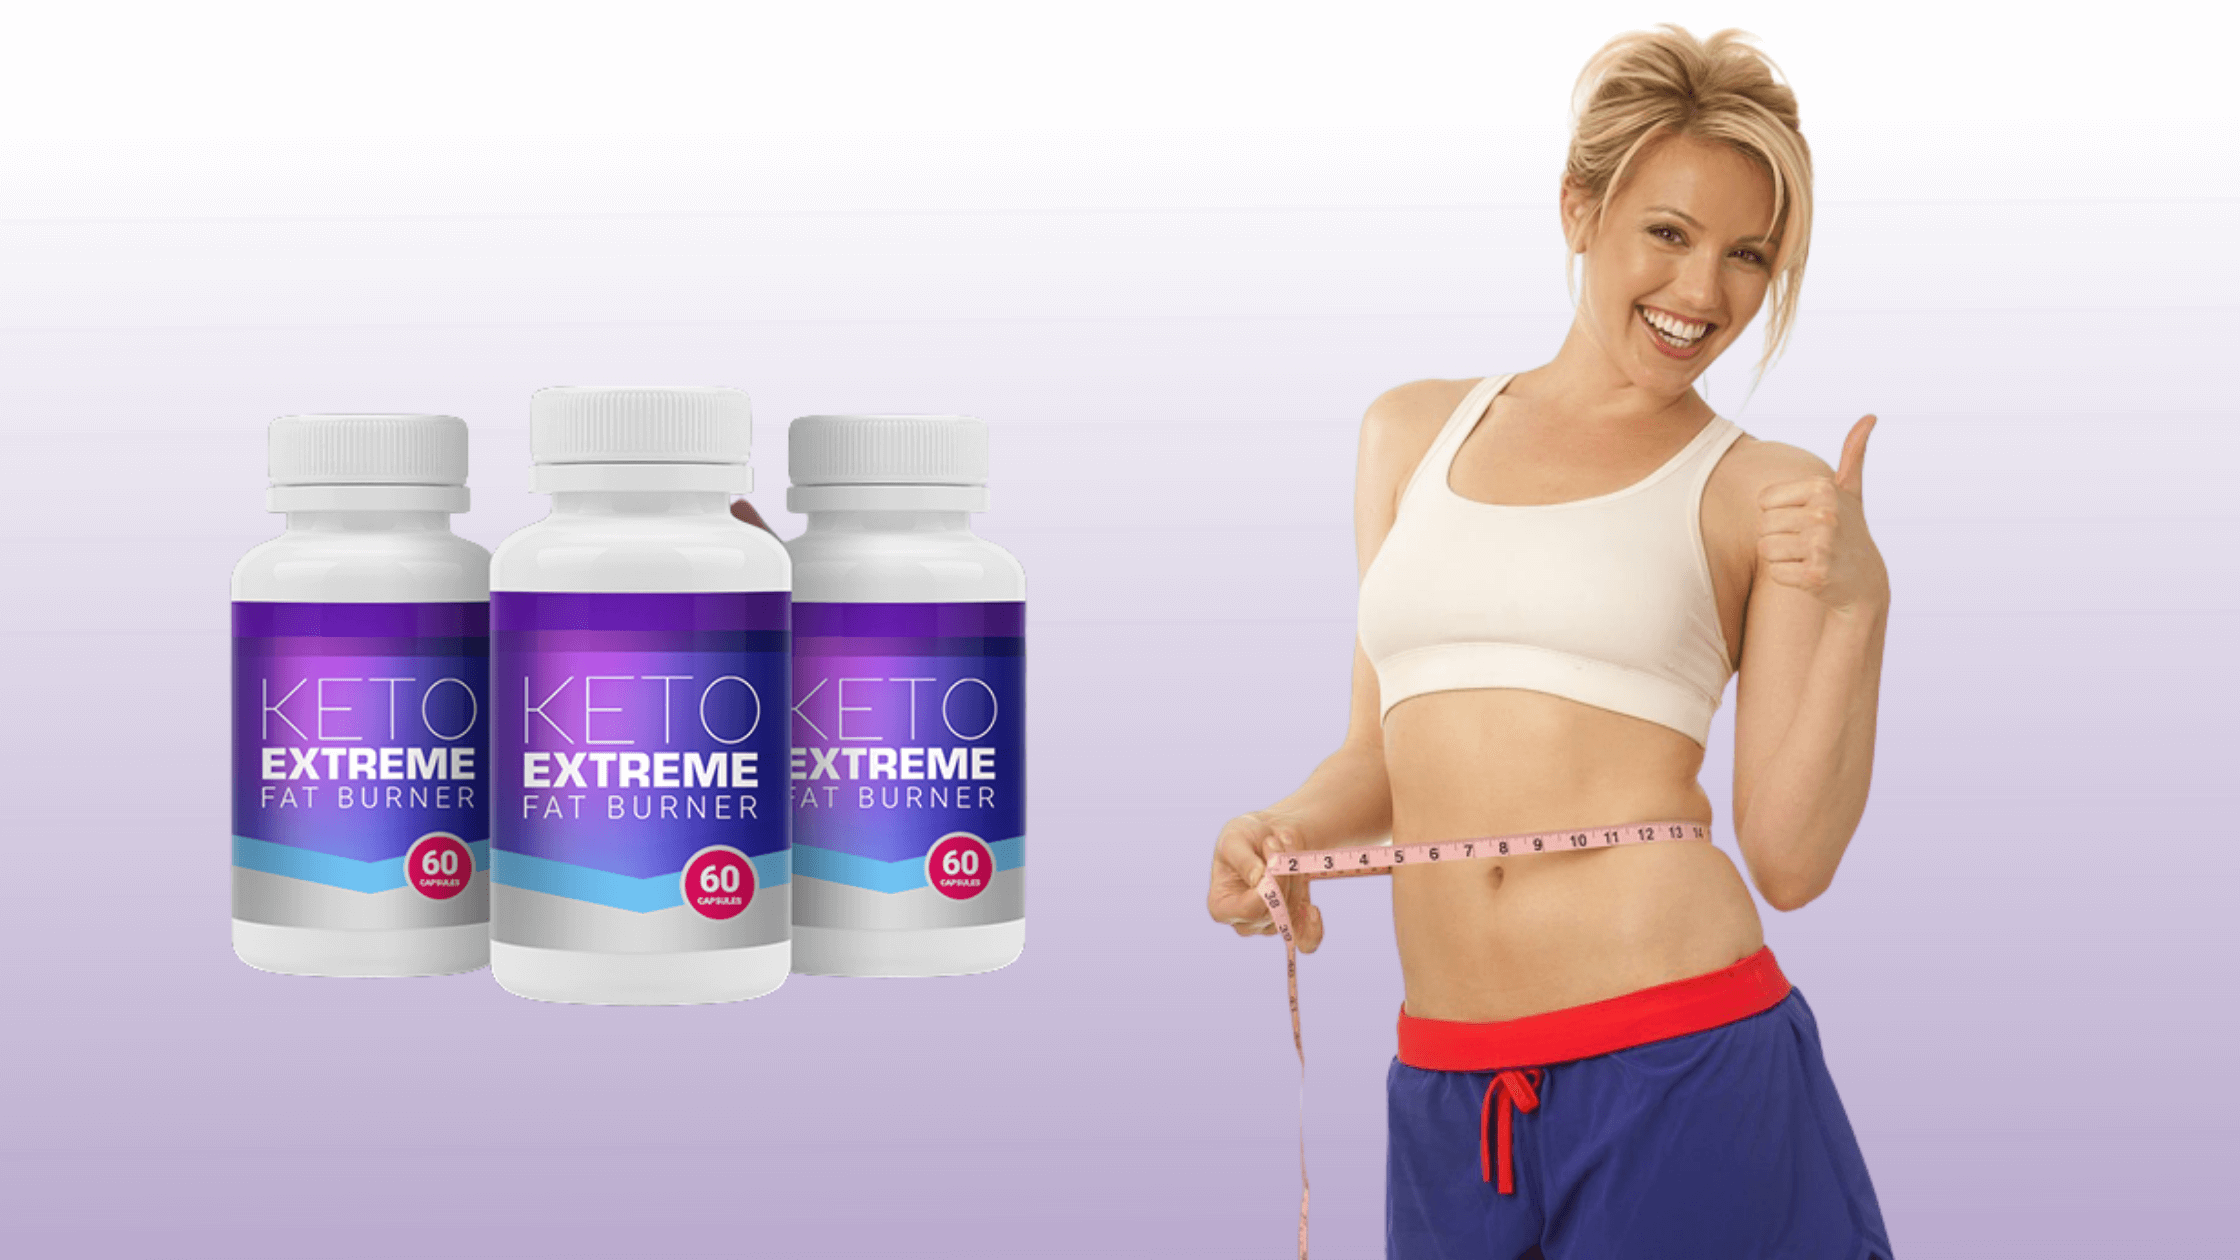 Keto Extreme Fat Burner South Africa Working